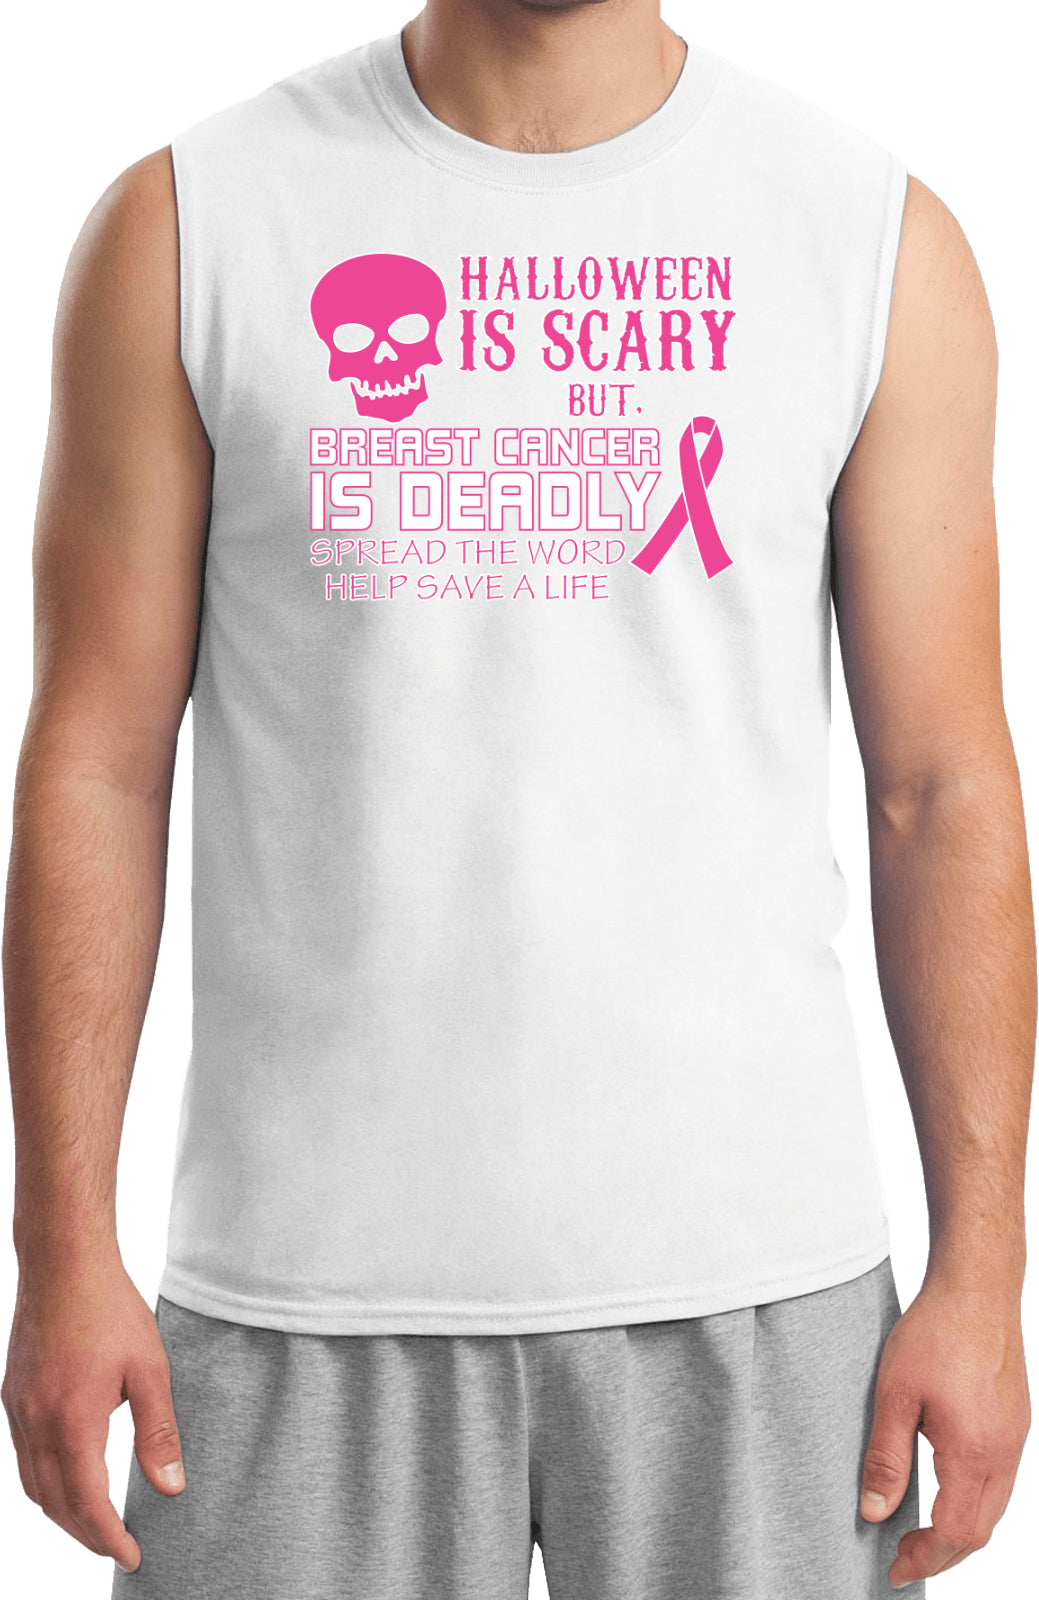 Breast Cancer T-shirt Halloween Scary Muscle Tee